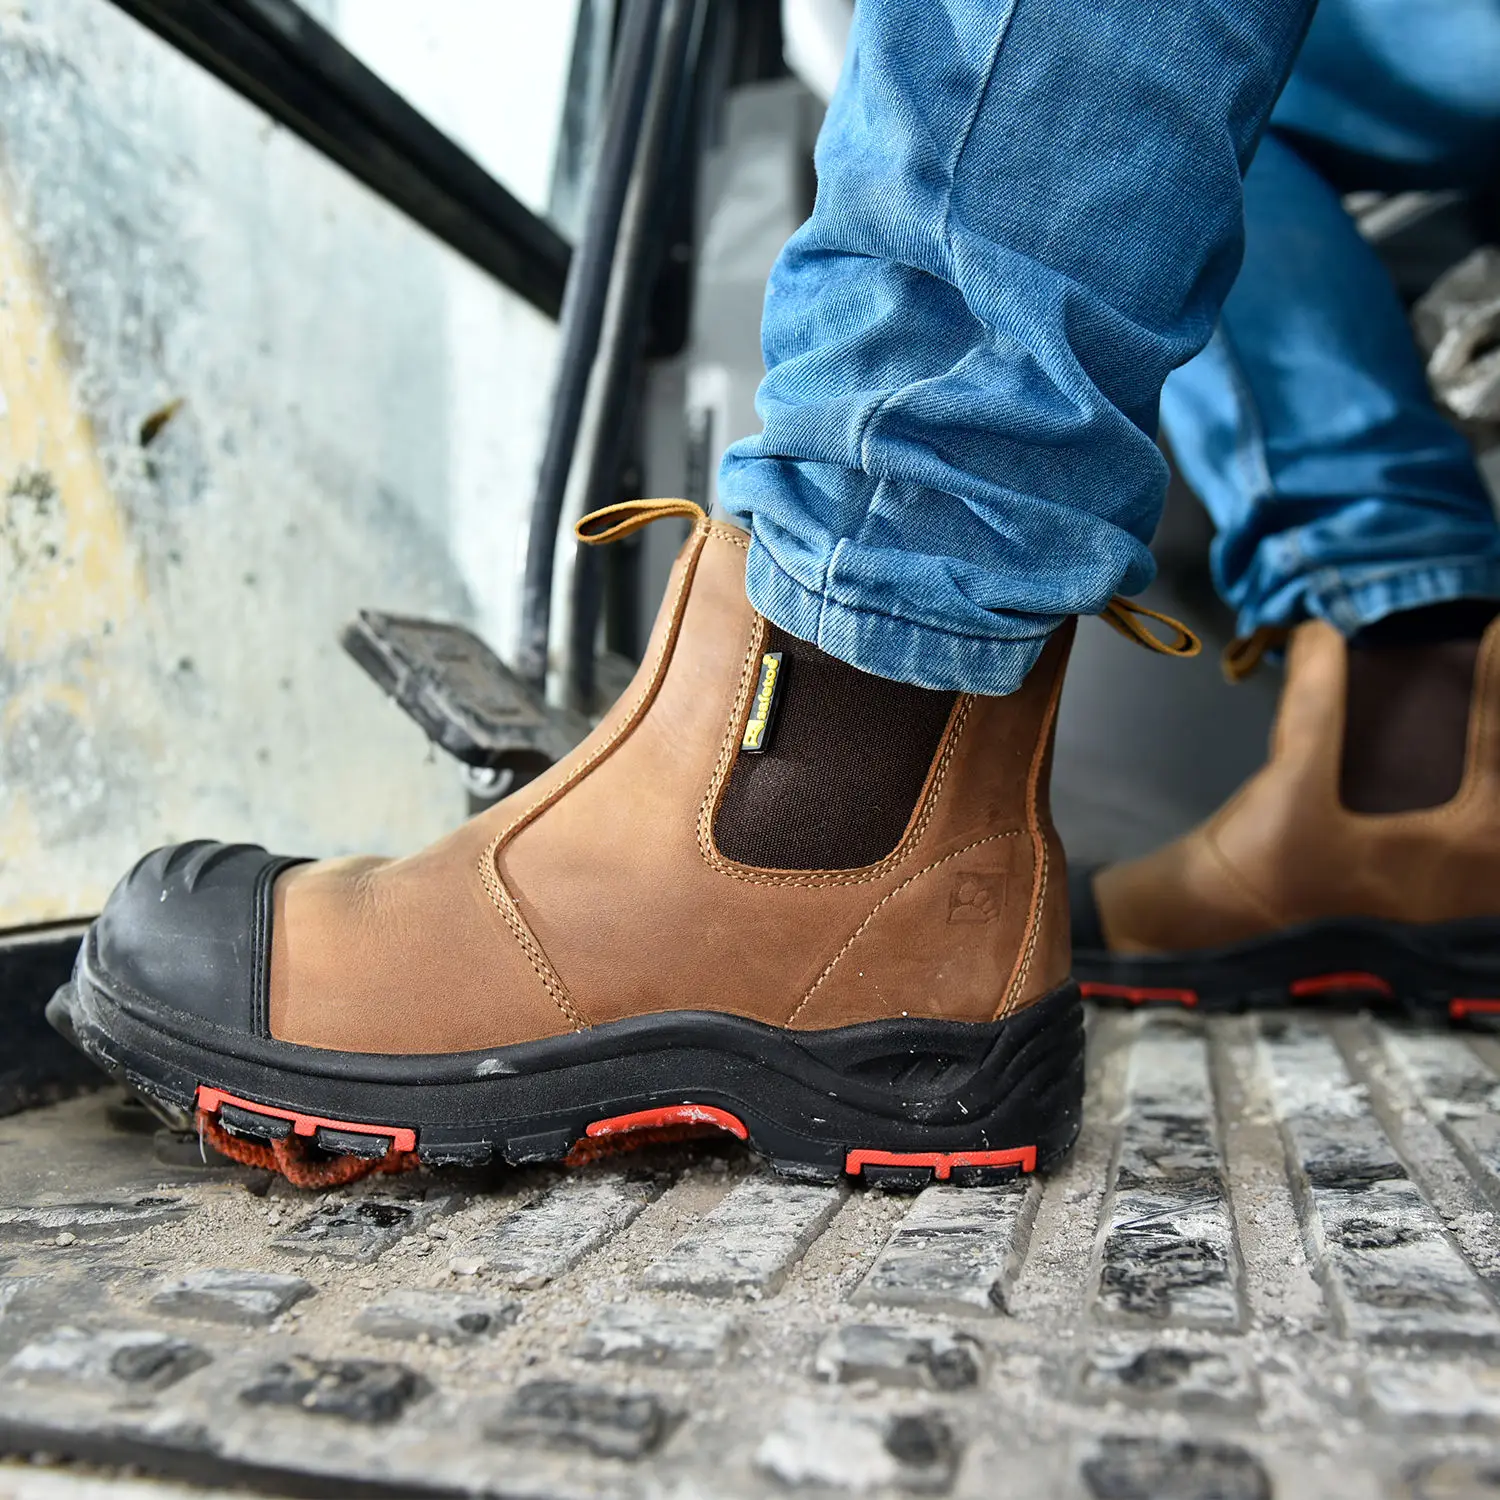 2022 Composite Toe Safety Boot Men's Heavy Duty Mining Industrial Construction Work Boot Shoes